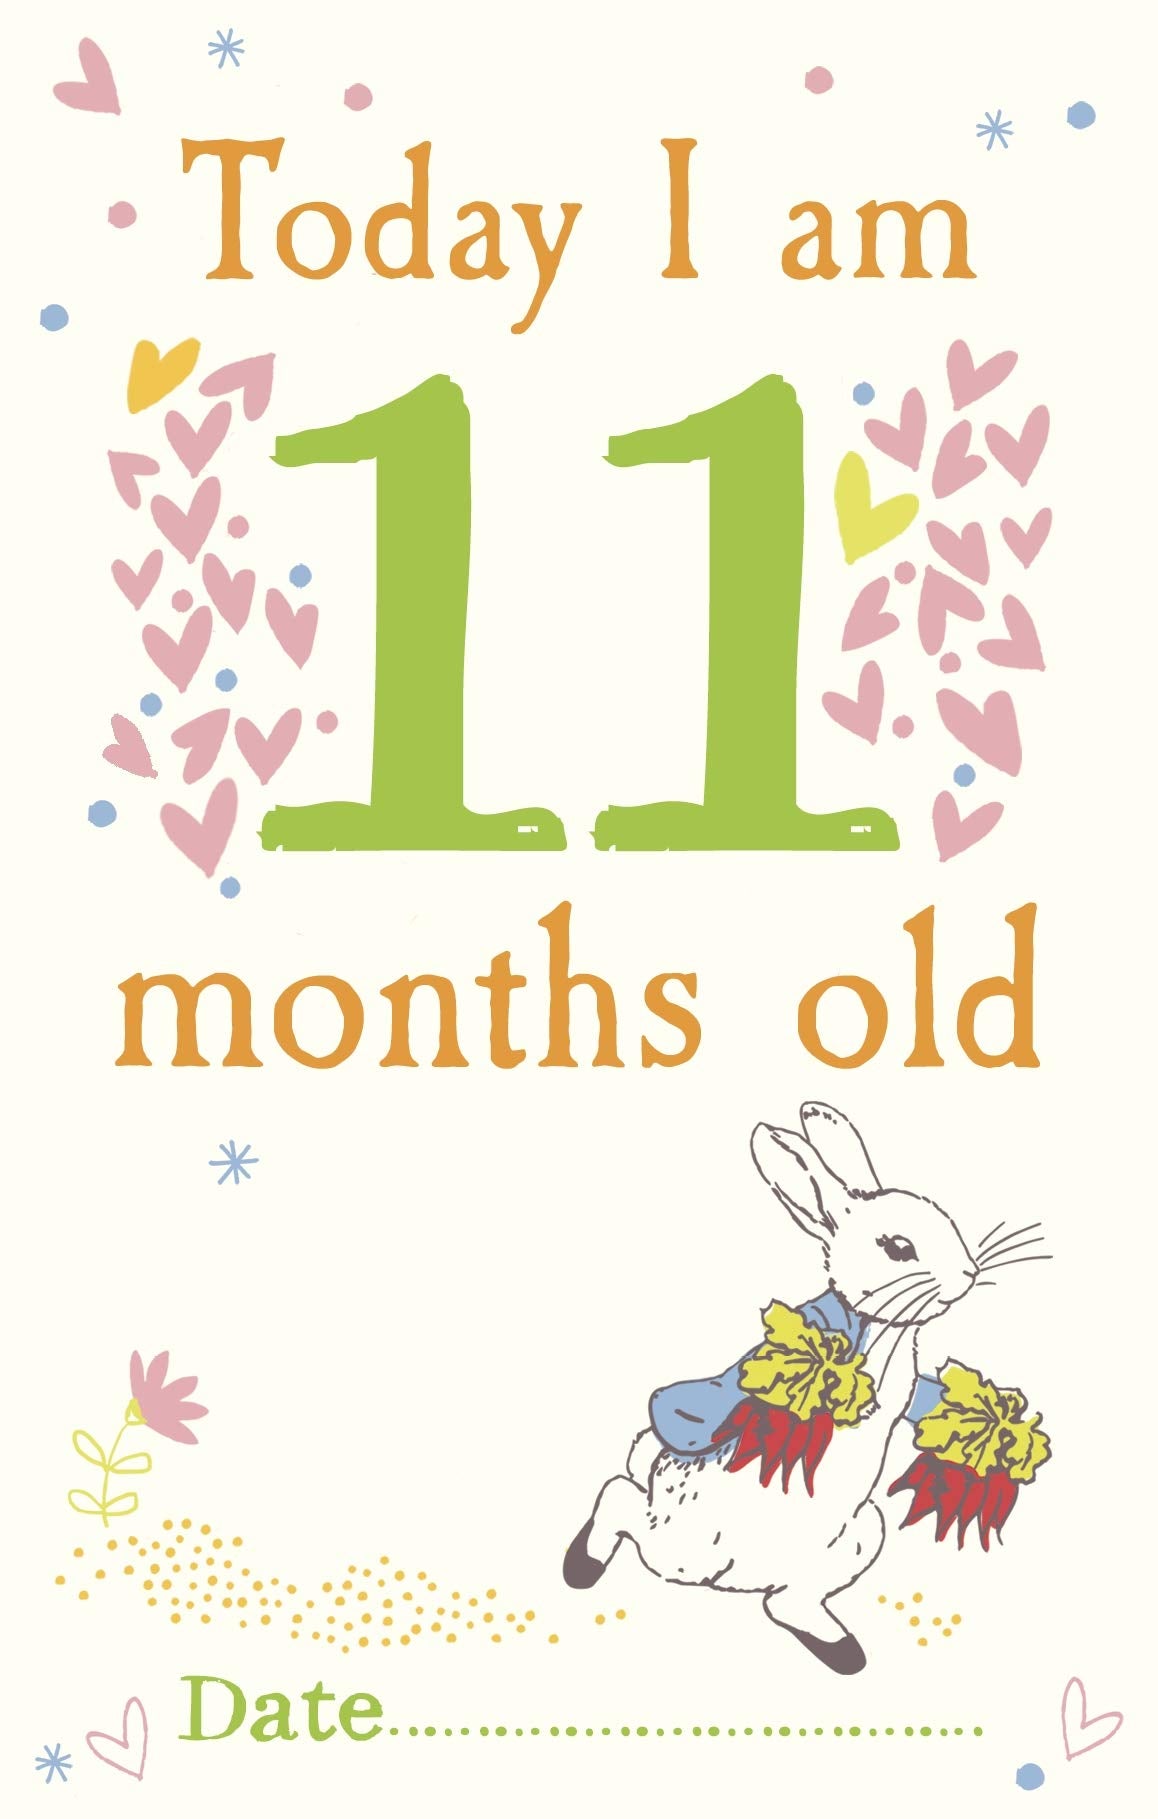 A Collection of baby milestone cards with a Peter Rabbit theme.